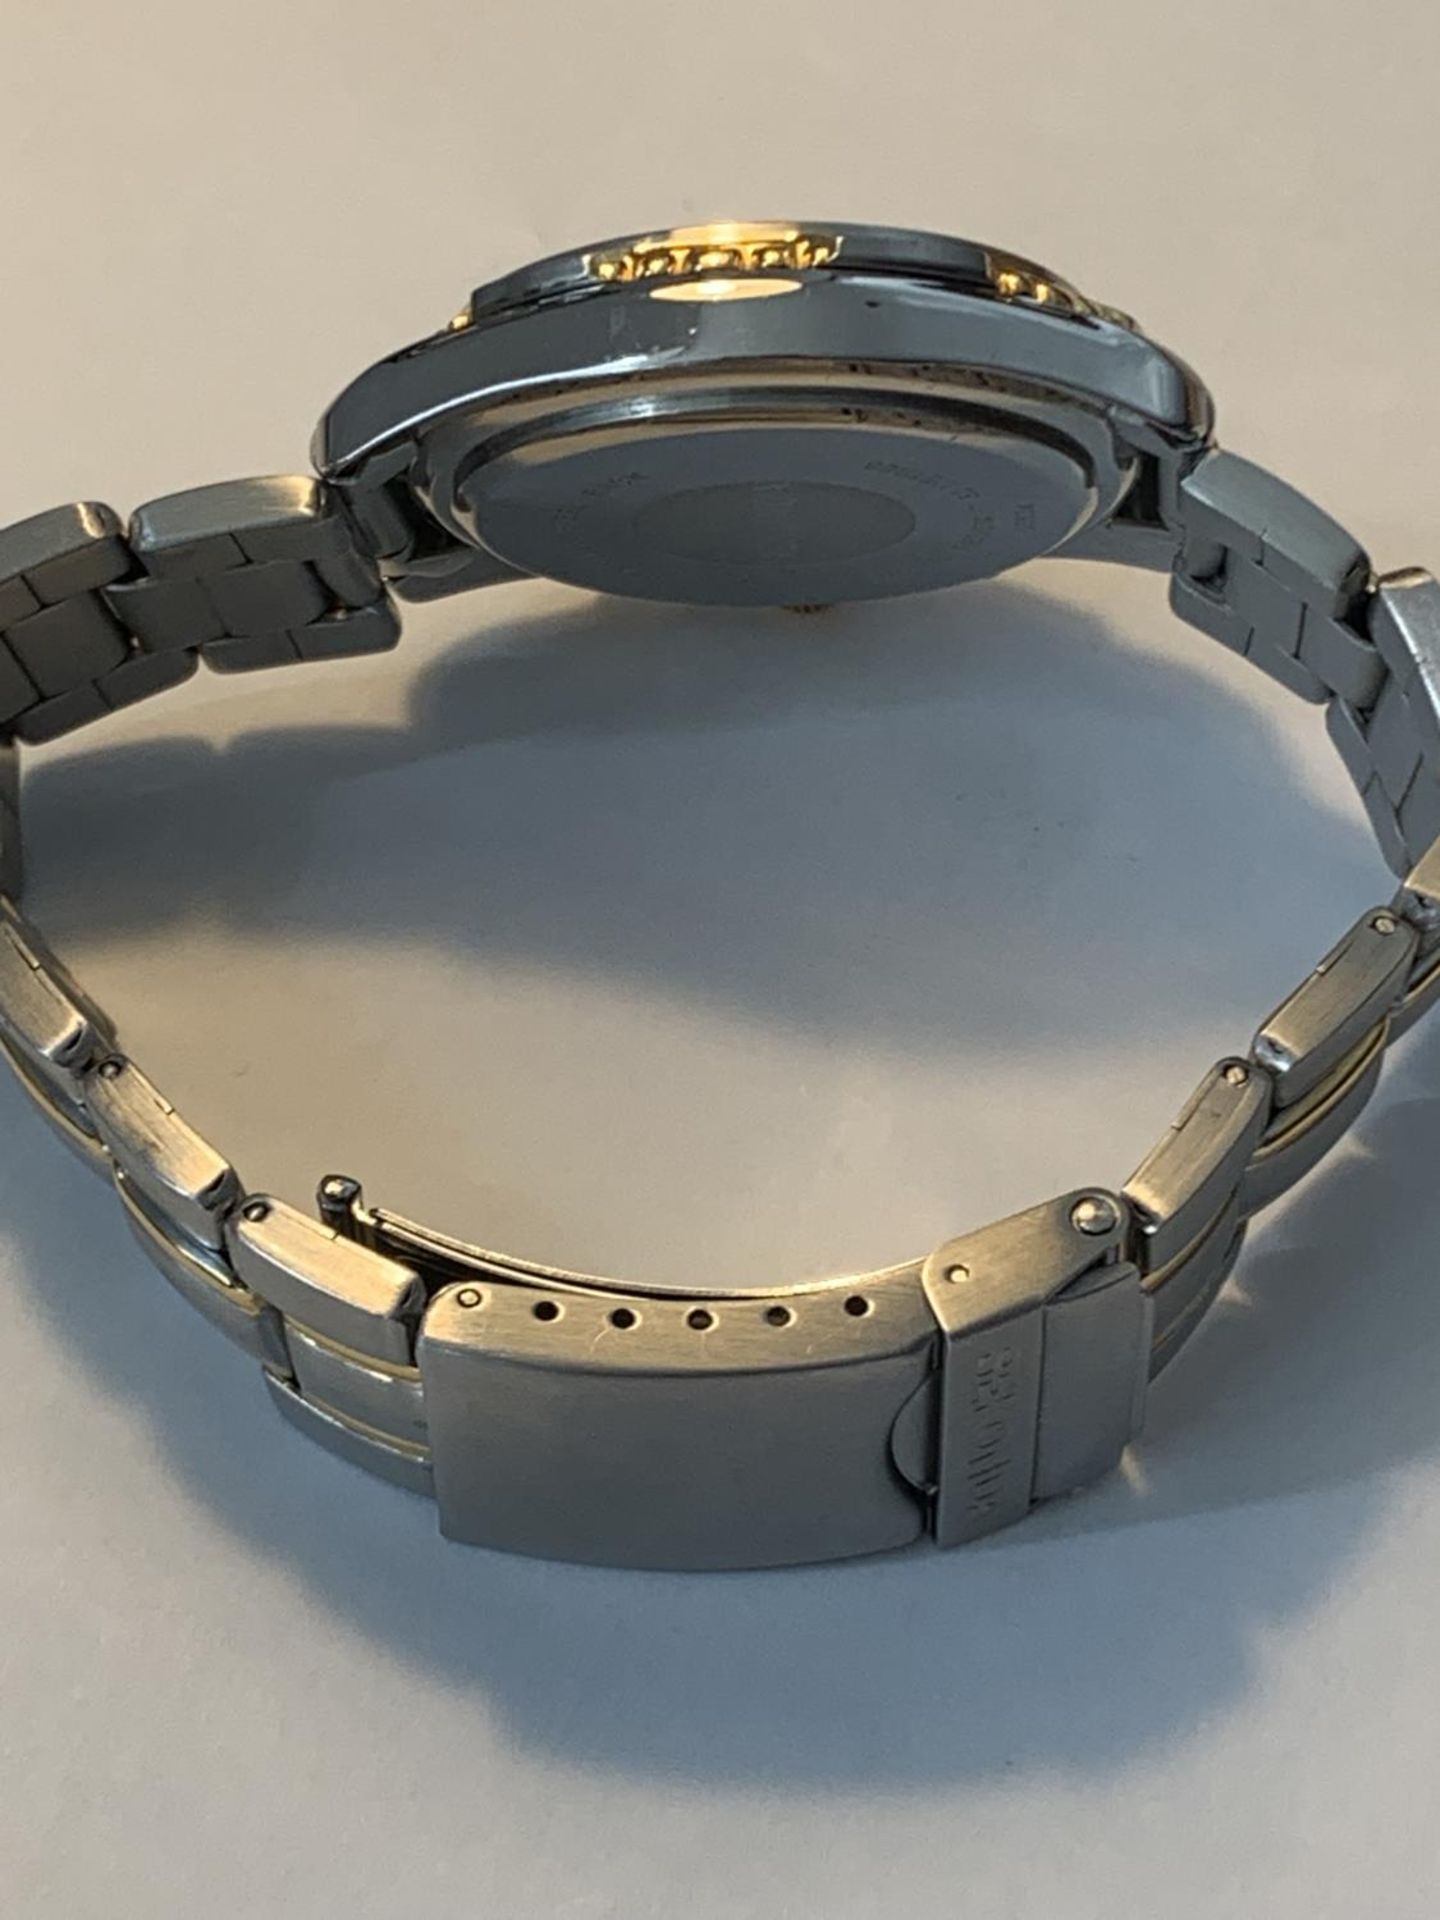 A SECONDA WRISTWATCH SEEN WORKING BUT NO WARRANTY - Image 3 of 3